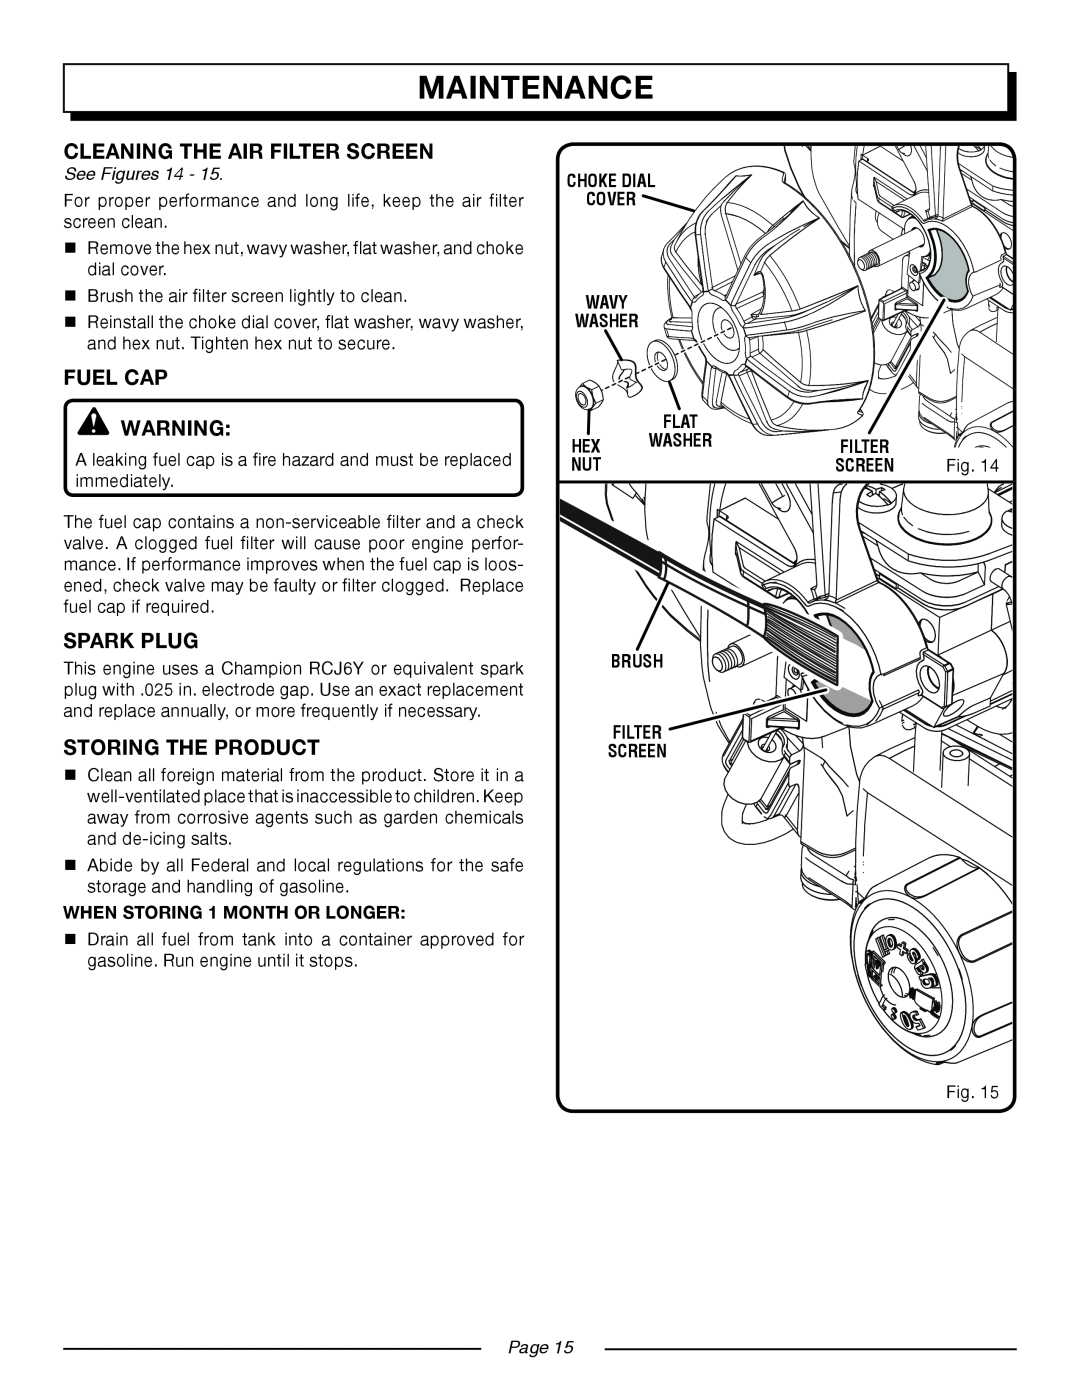 Homelite UT50901 Cleaning The Air Filter Screen, Fuel Cap, Spark Plug, STORing the product, Maintenance, See Figures 14 